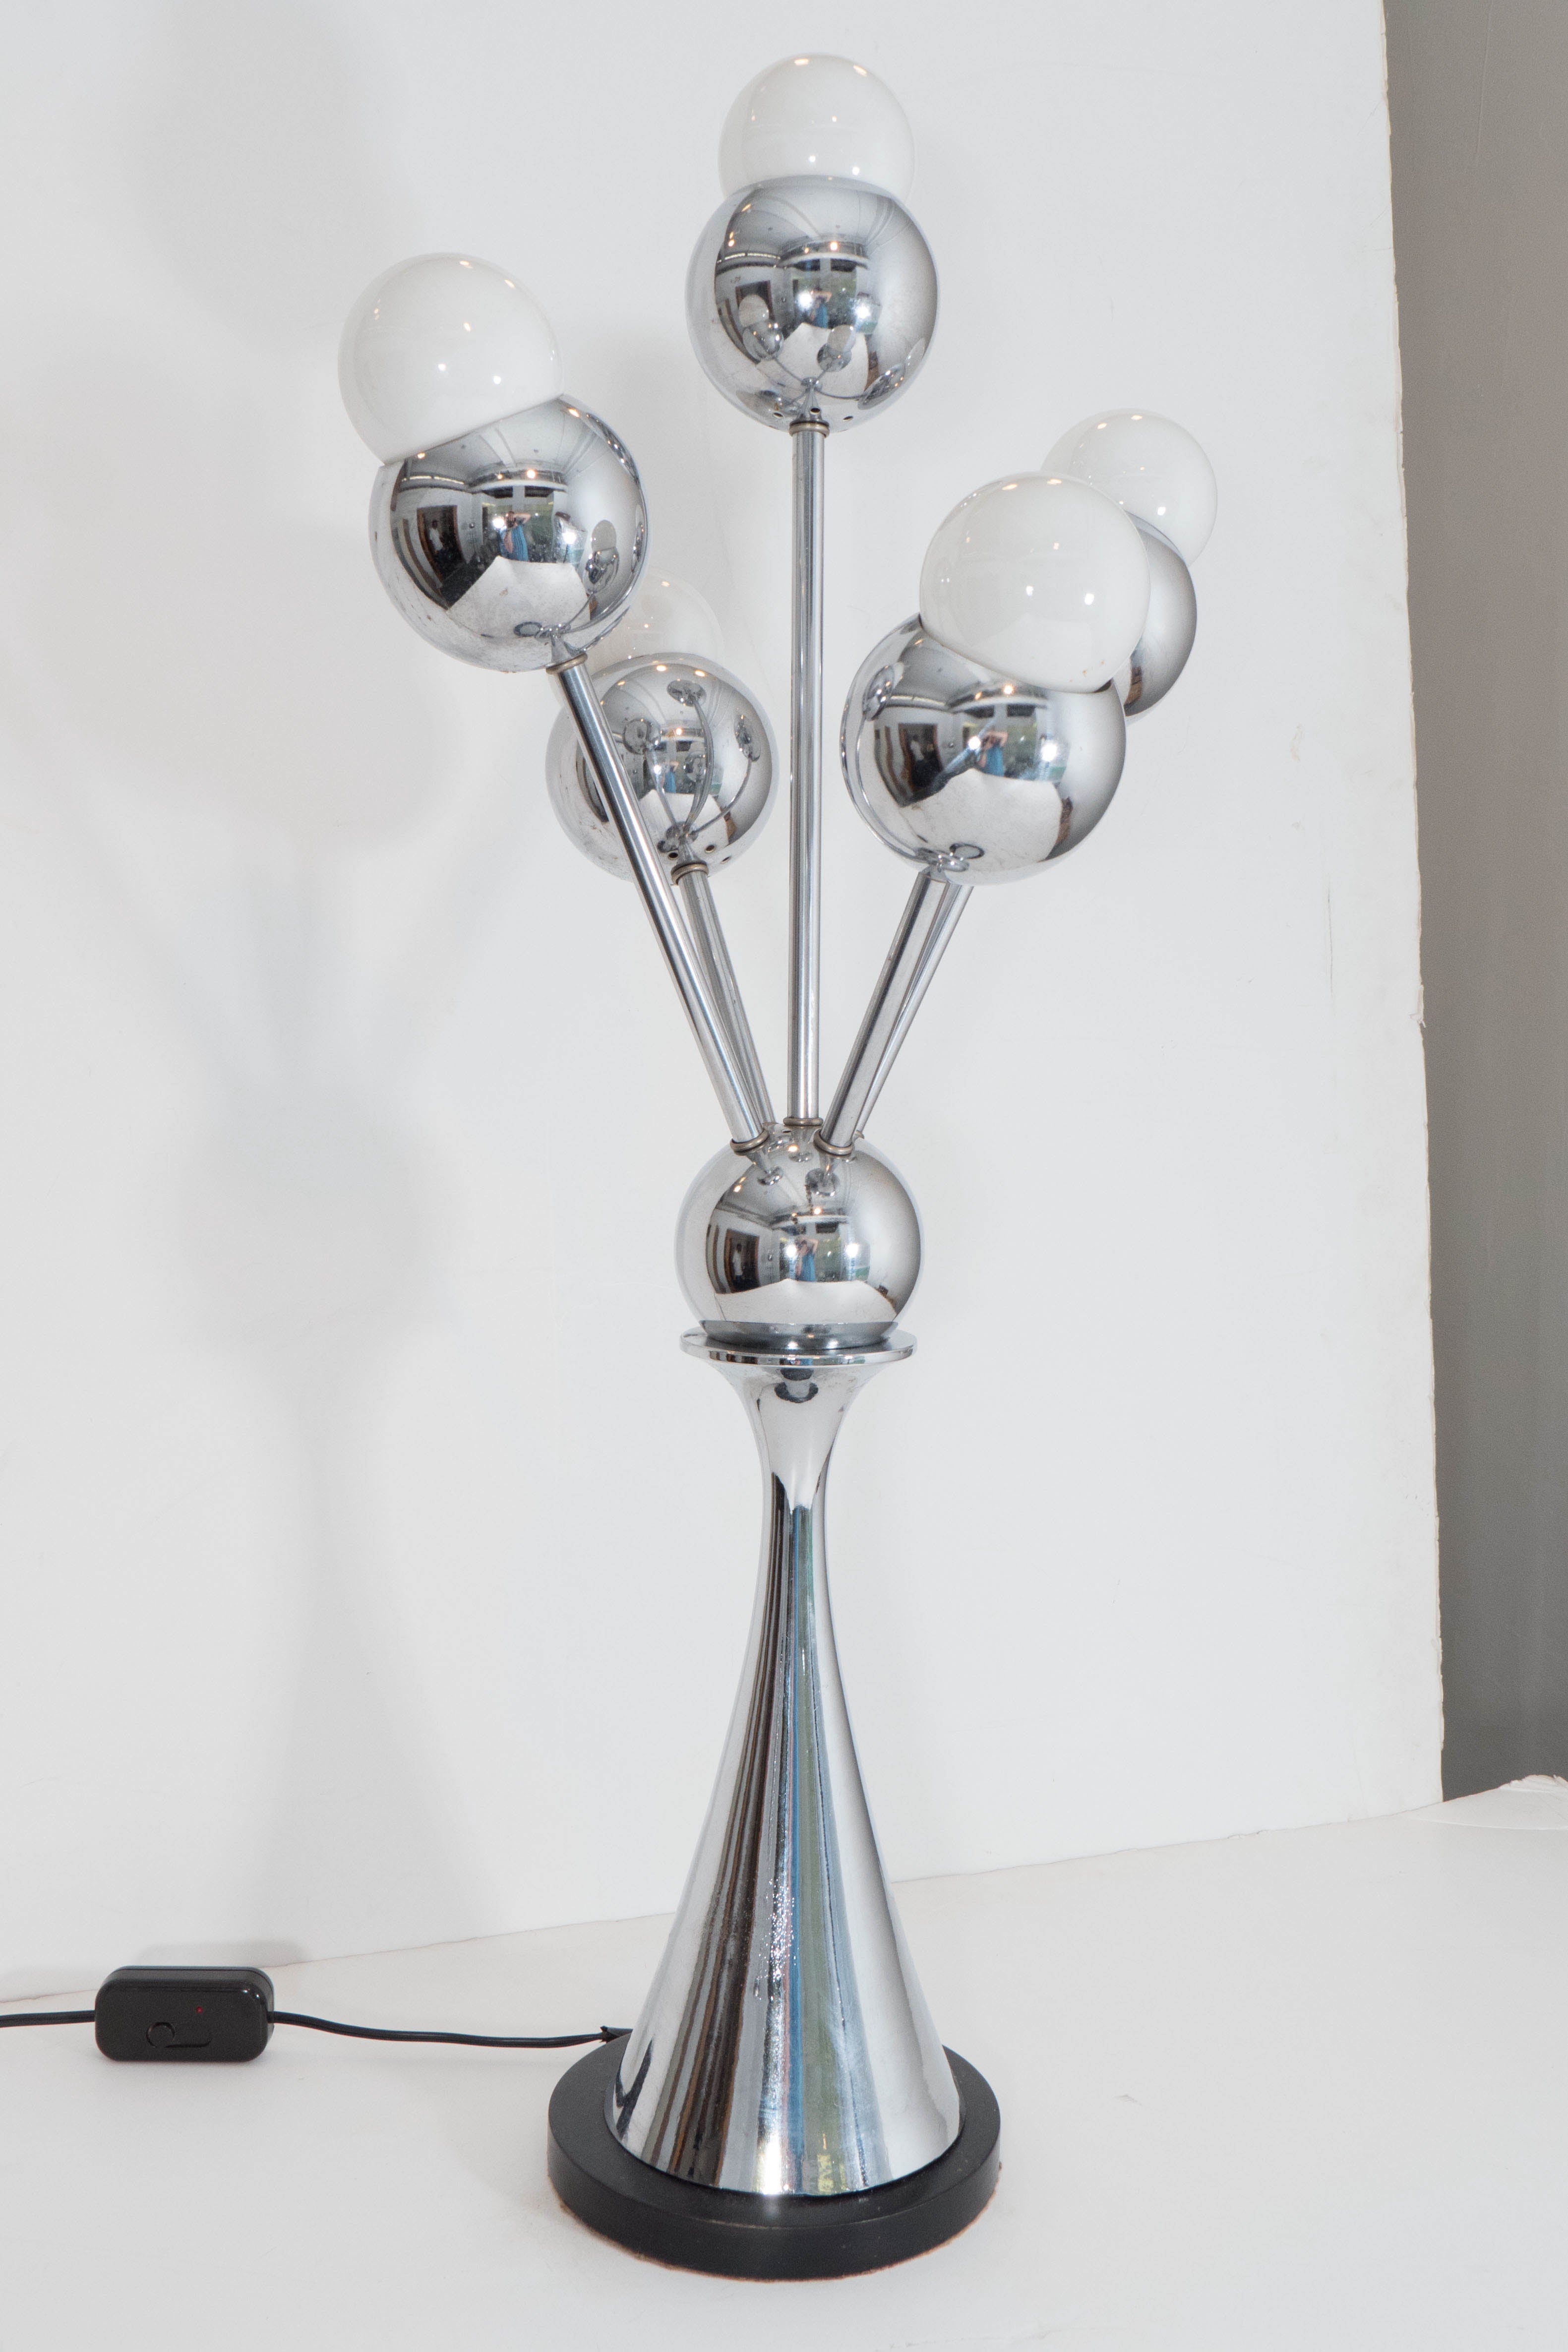 A pair of chrome table lamps, produced circa 1970s in the Space Age style, each with five globe form shades radiating from a nucleus, raised by a tapered shaft on a circular black painted wood base. Wiring and sockets to US standard, requires five